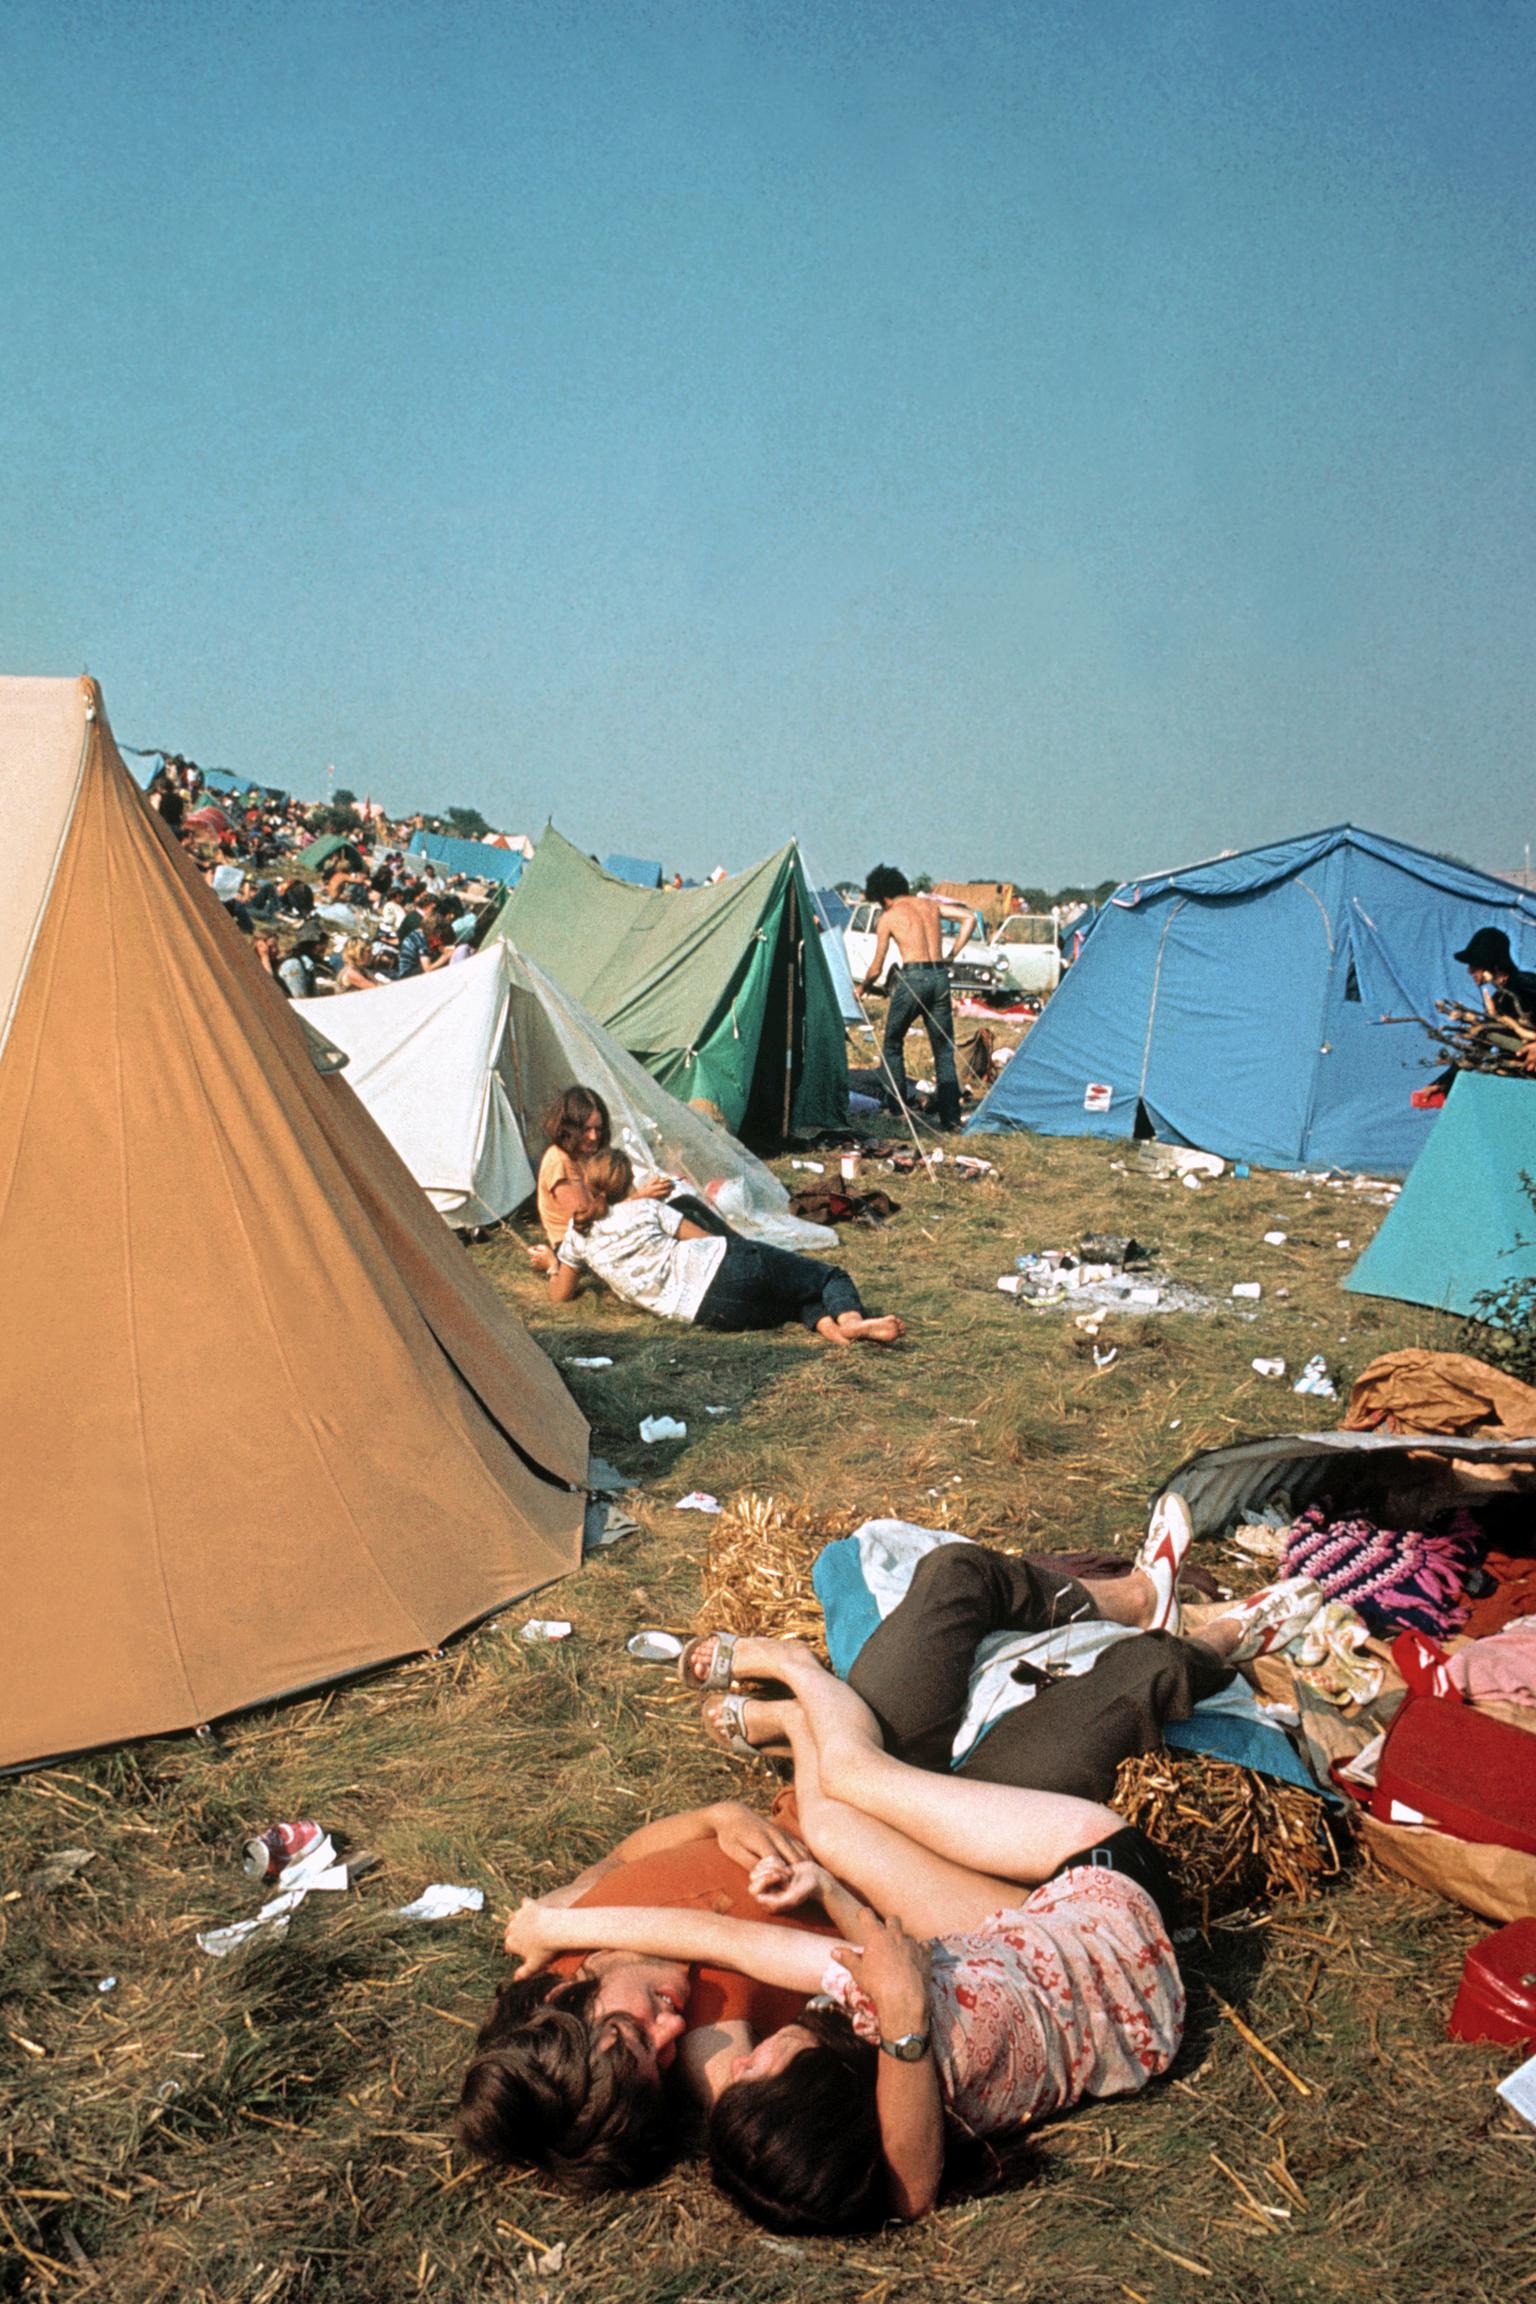 Isle of Wight Festival. A couple waking up after a night huddling together to keep warm